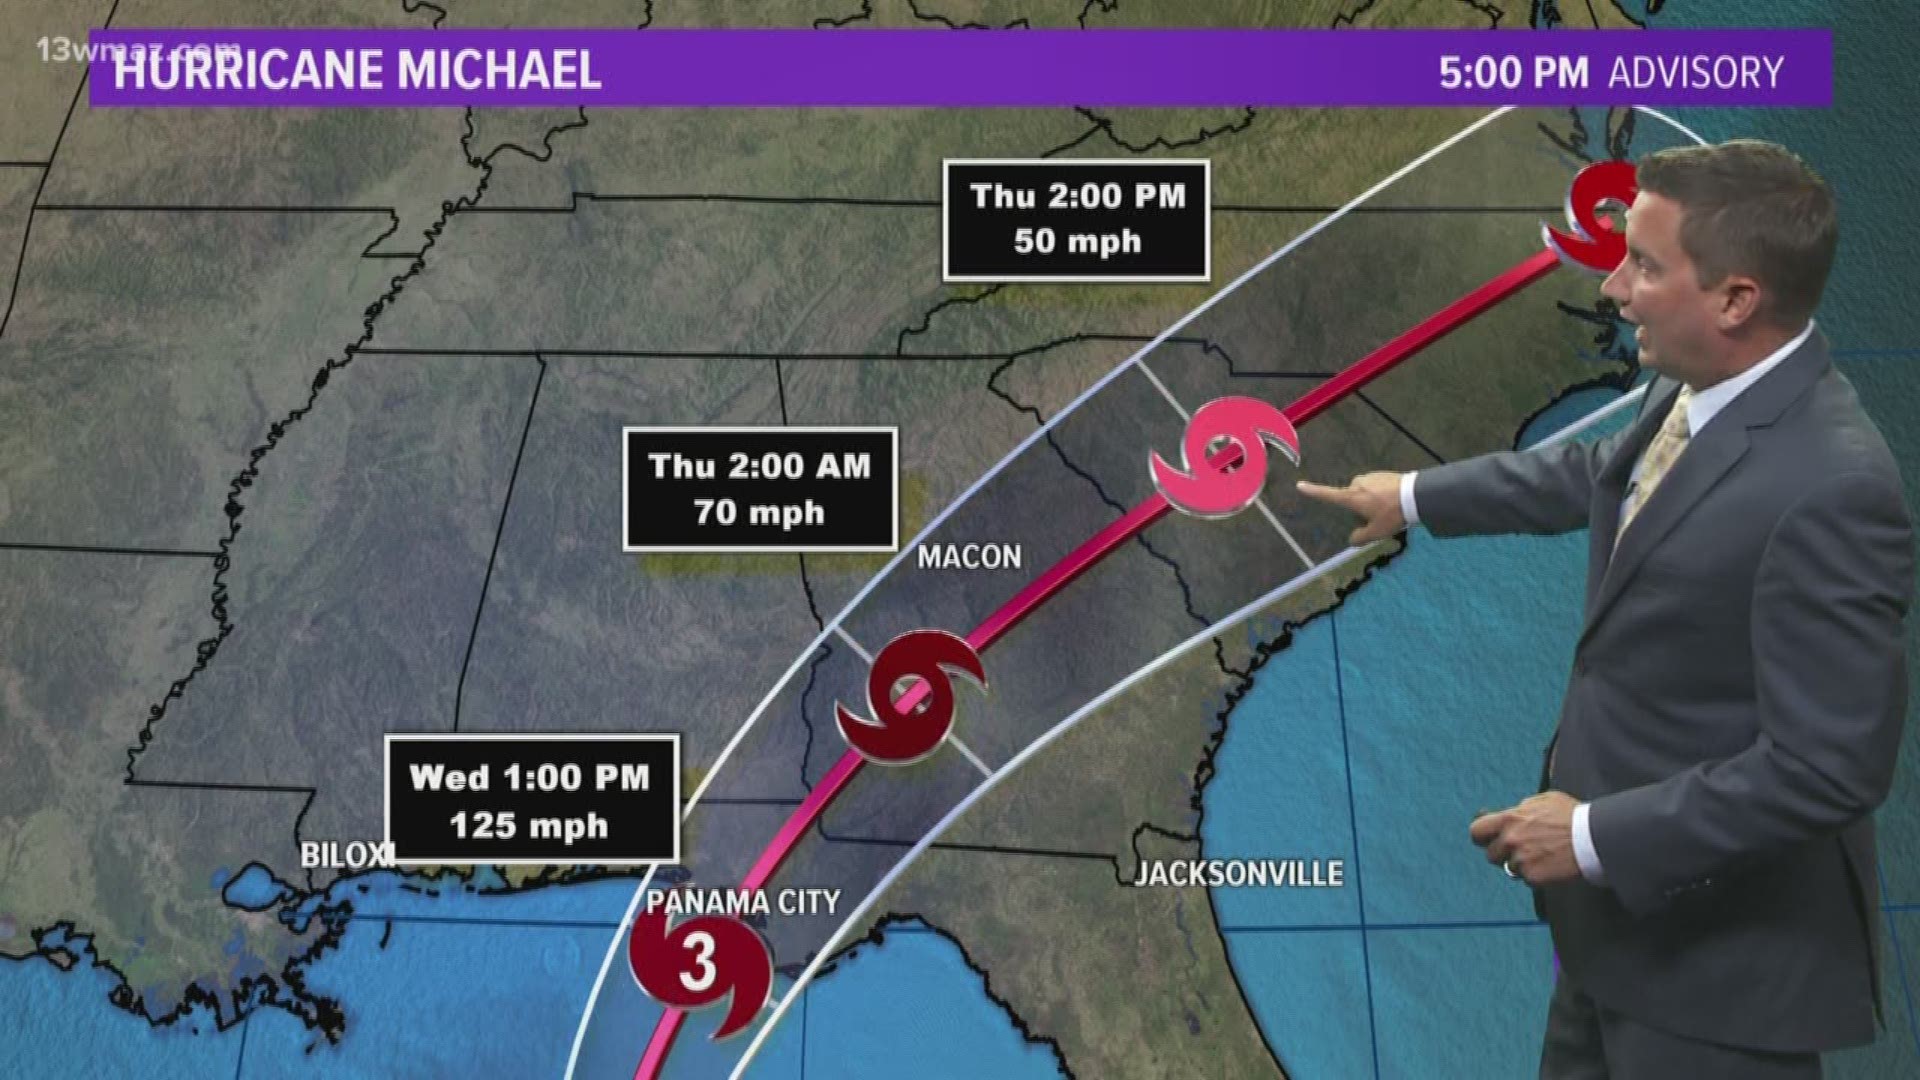 Chief Meteorologist Ben Jones gives updates on Hurricane Michael now that its strengthened to a Category 3